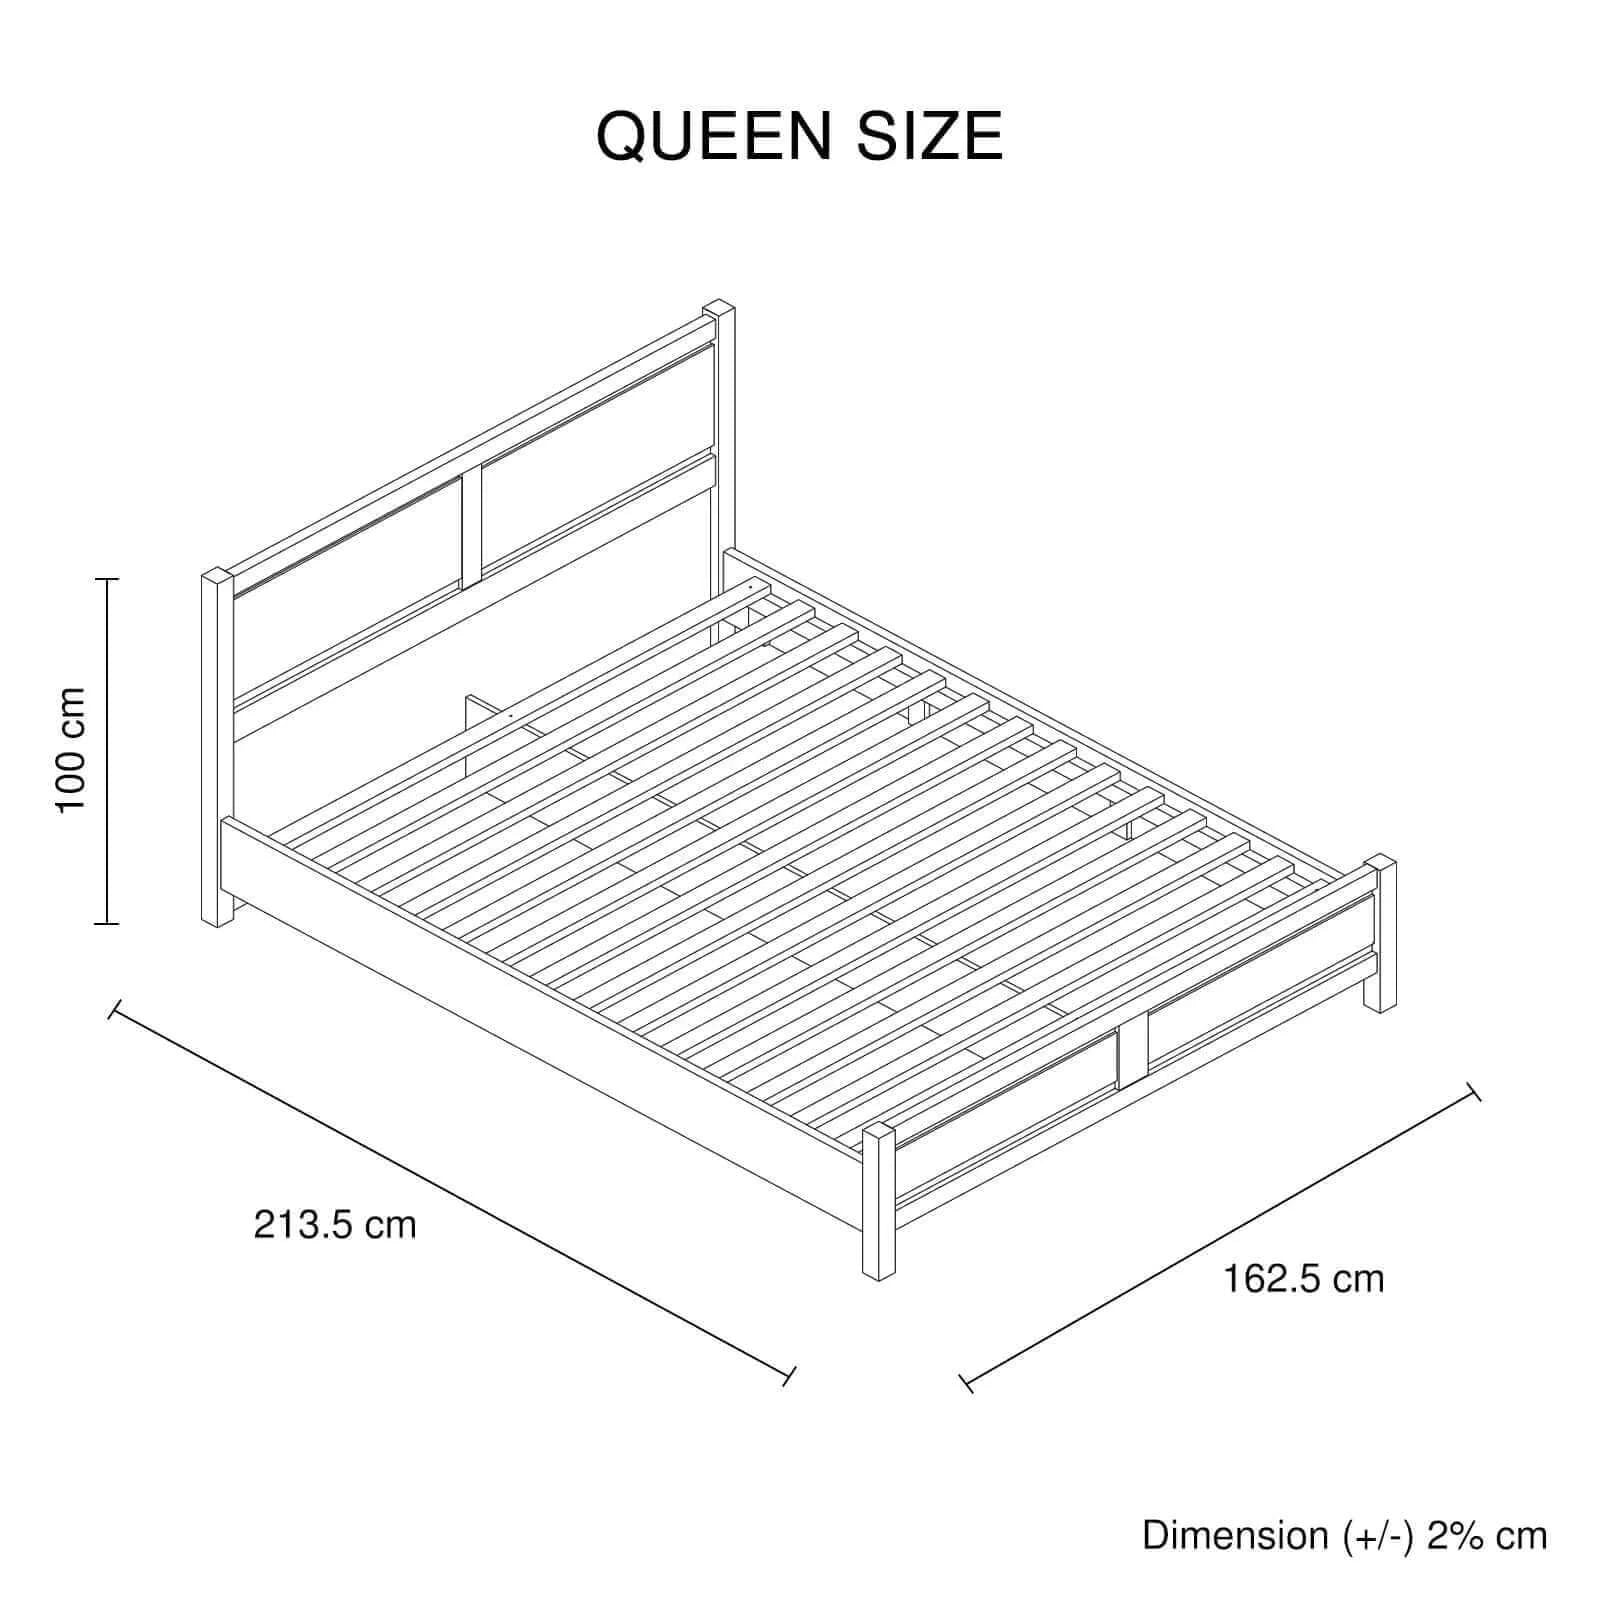 Buy 3 Pieces Bedroom Suite Natural Wood Like MDF Structure Queen Size White Ash Colour Bed-Upinteriors